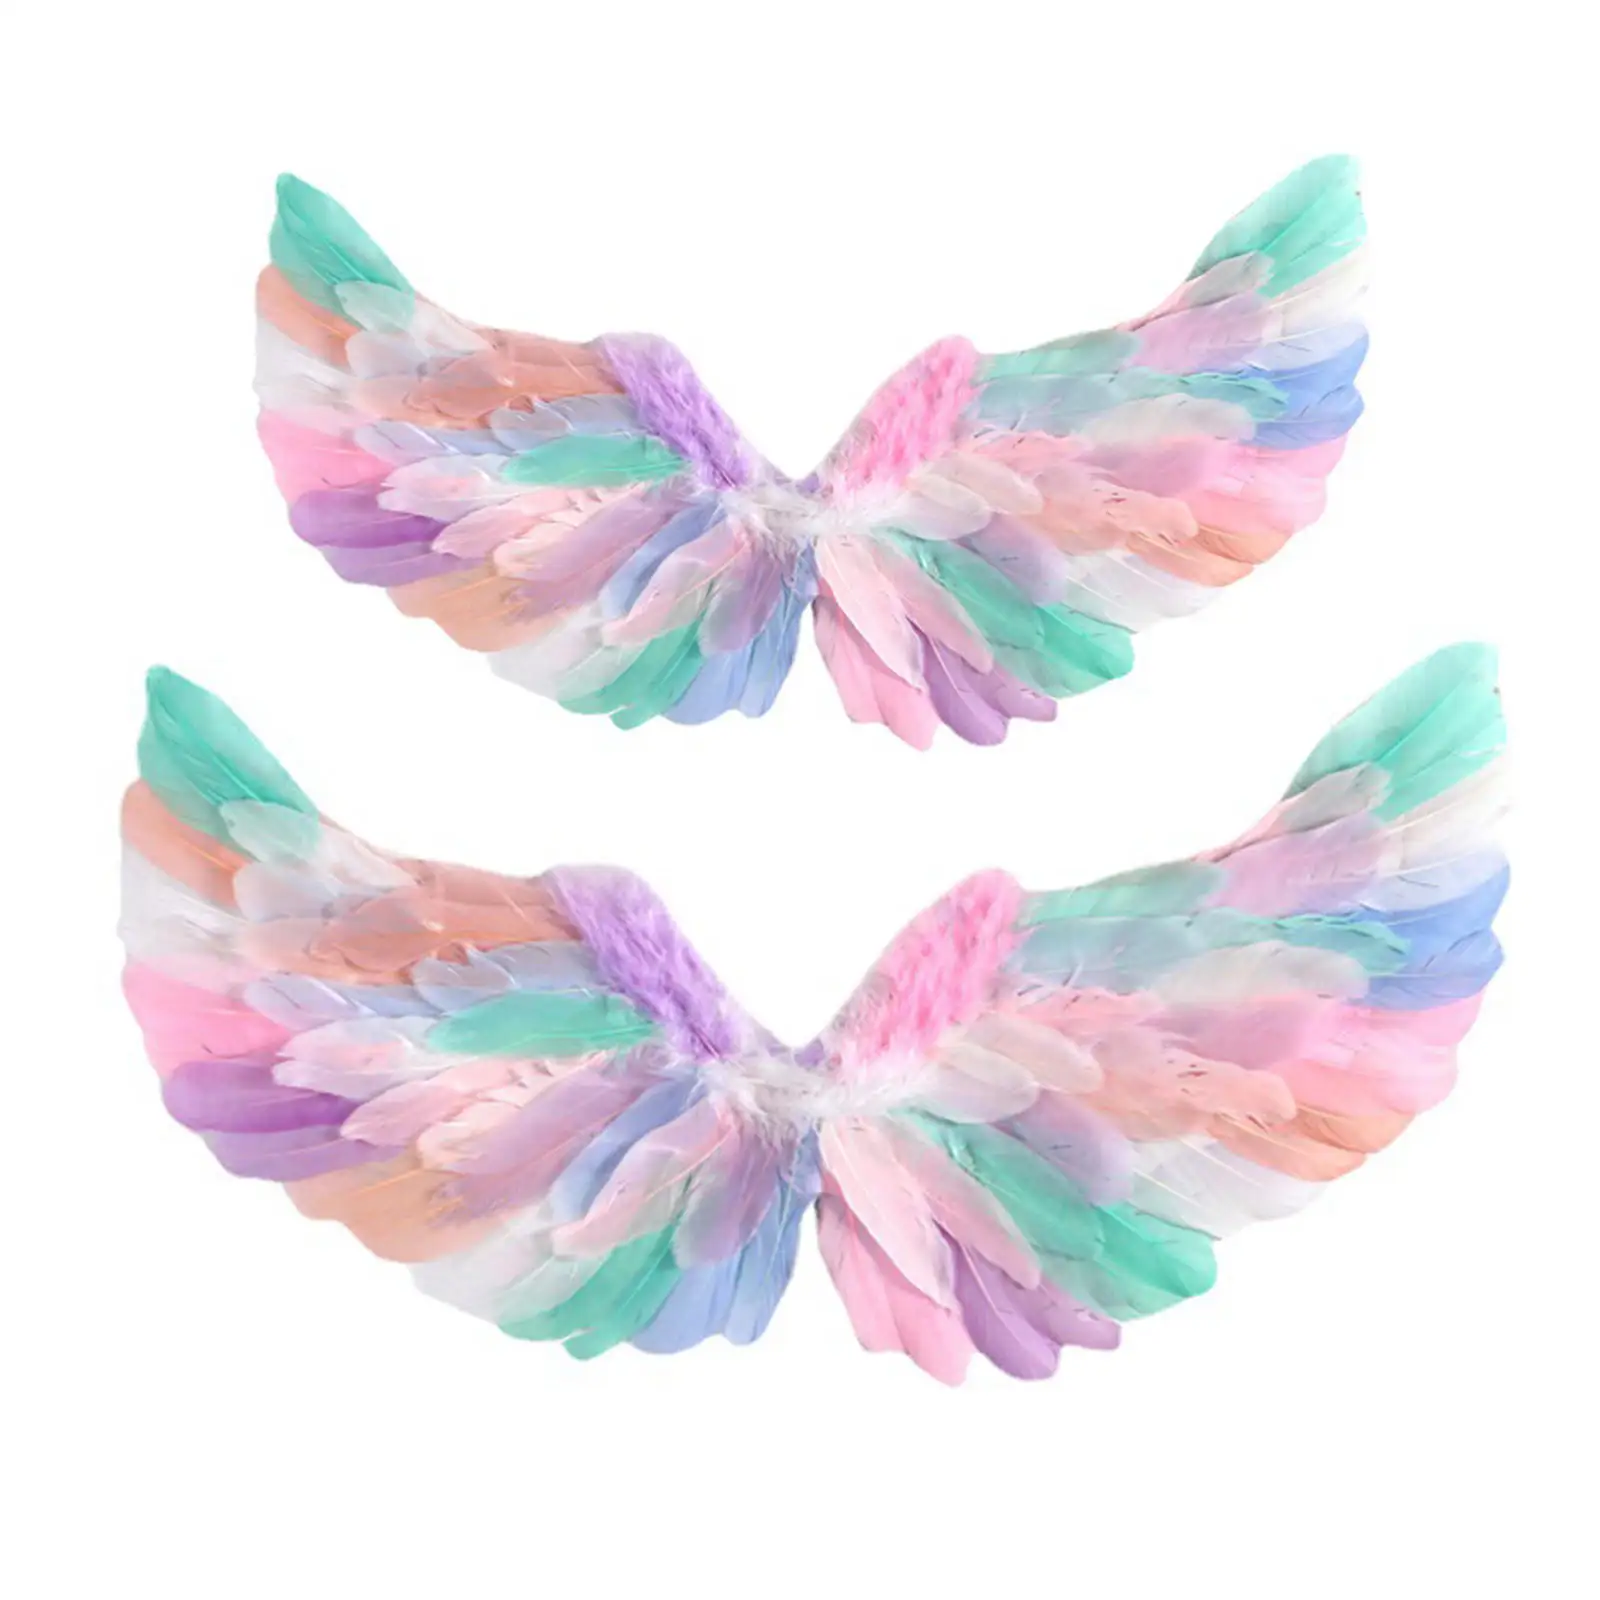 Kids Fairy Wing Colorful Wing Fairy Wing Fancy Dress Wing Feather Angel Wing for Christmas Living Room Decor Cosplay Kids Girl